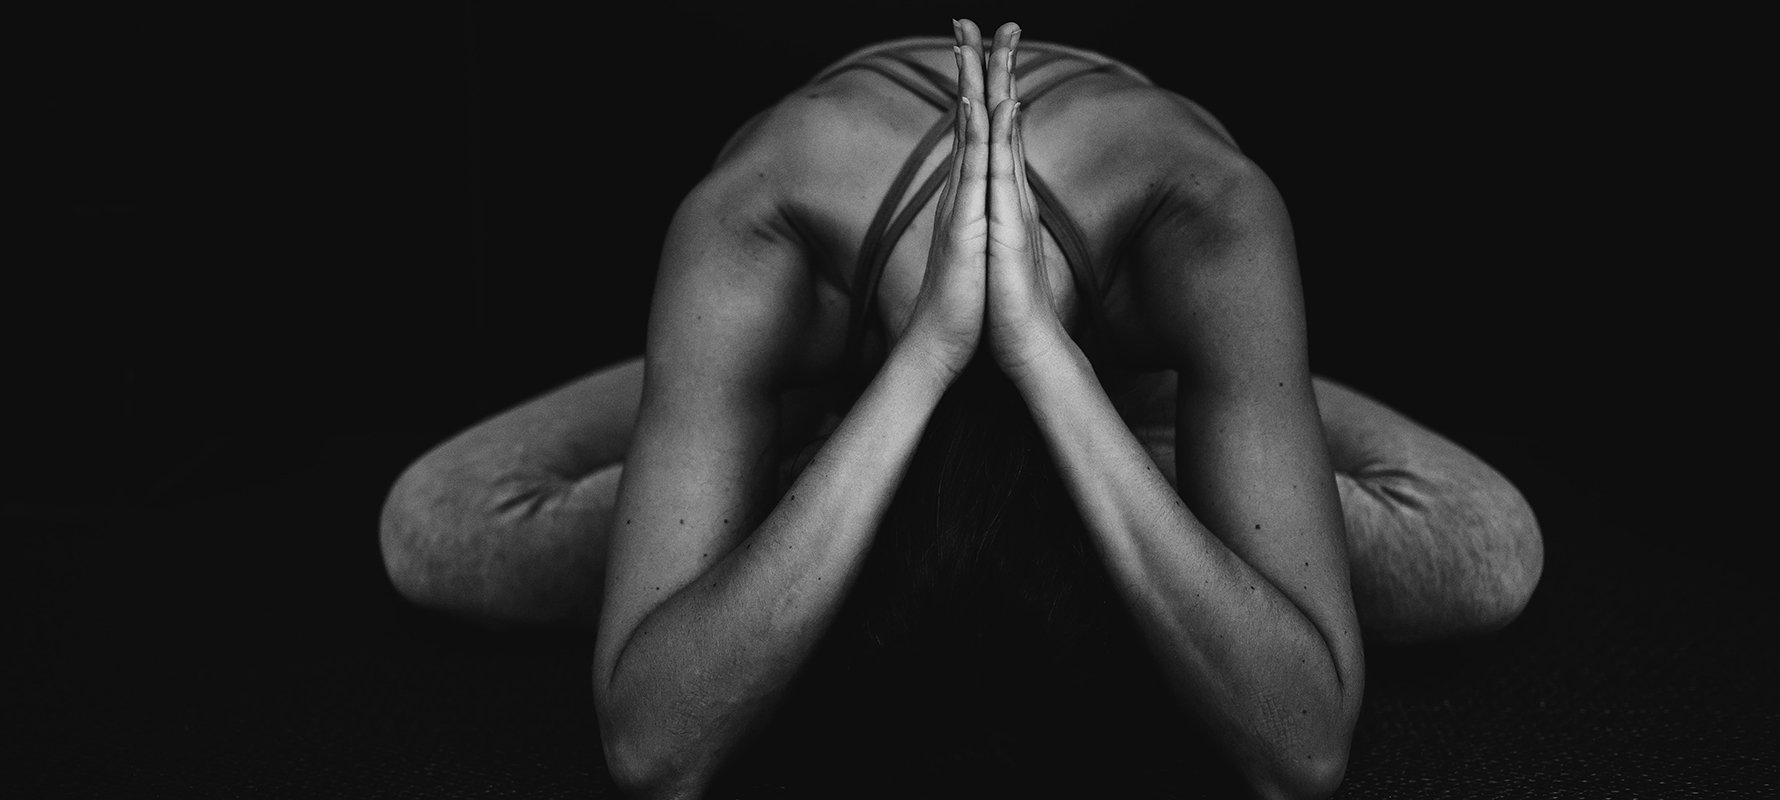 A woman performing a yoga pose.